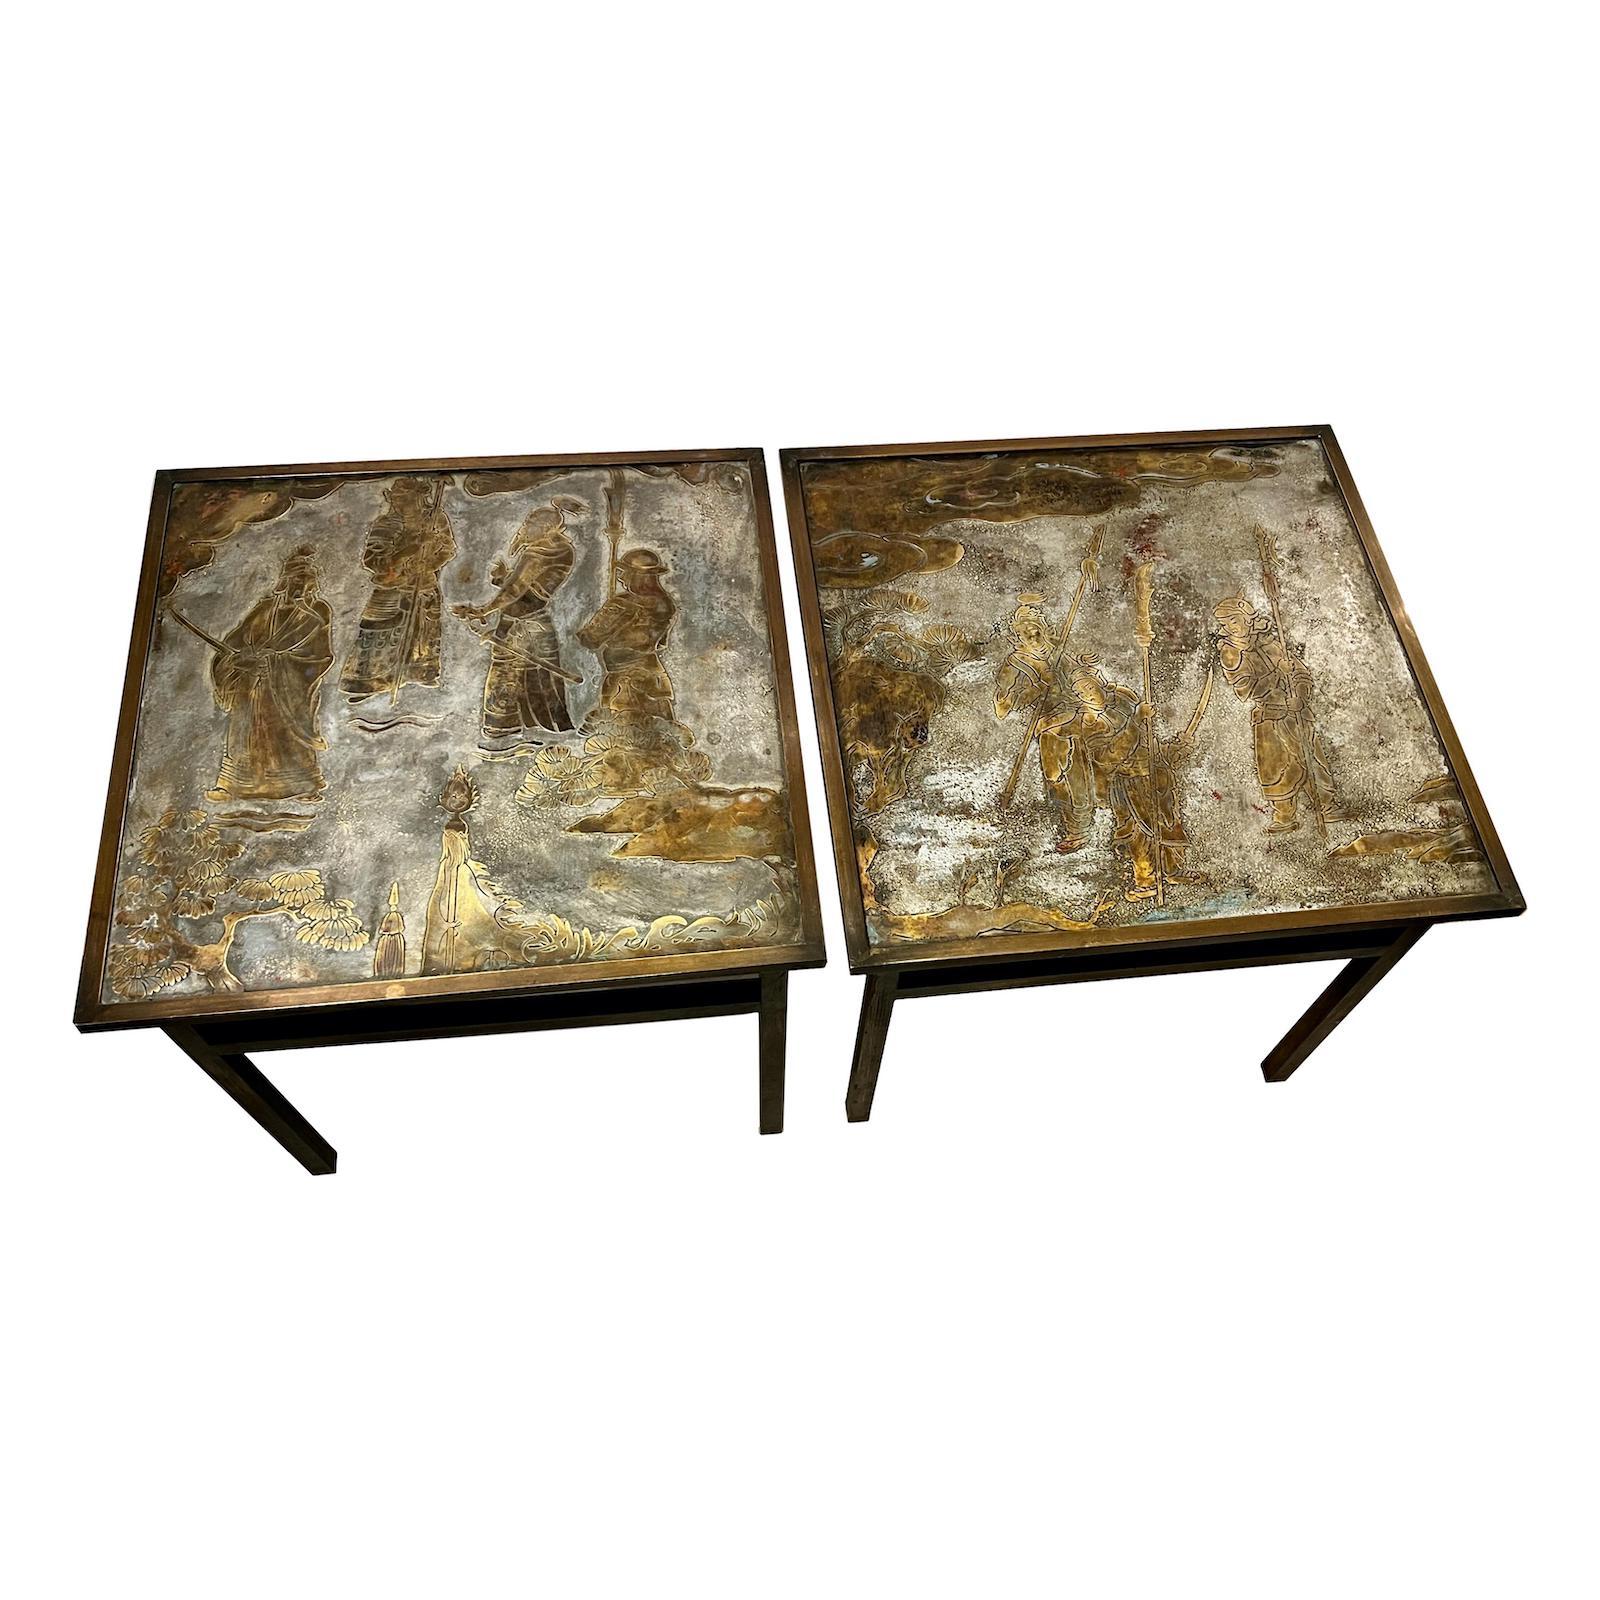 Pair of circa 1960's American LaVerne patinated bronze side tables.

Measurements:
Height: 15.5